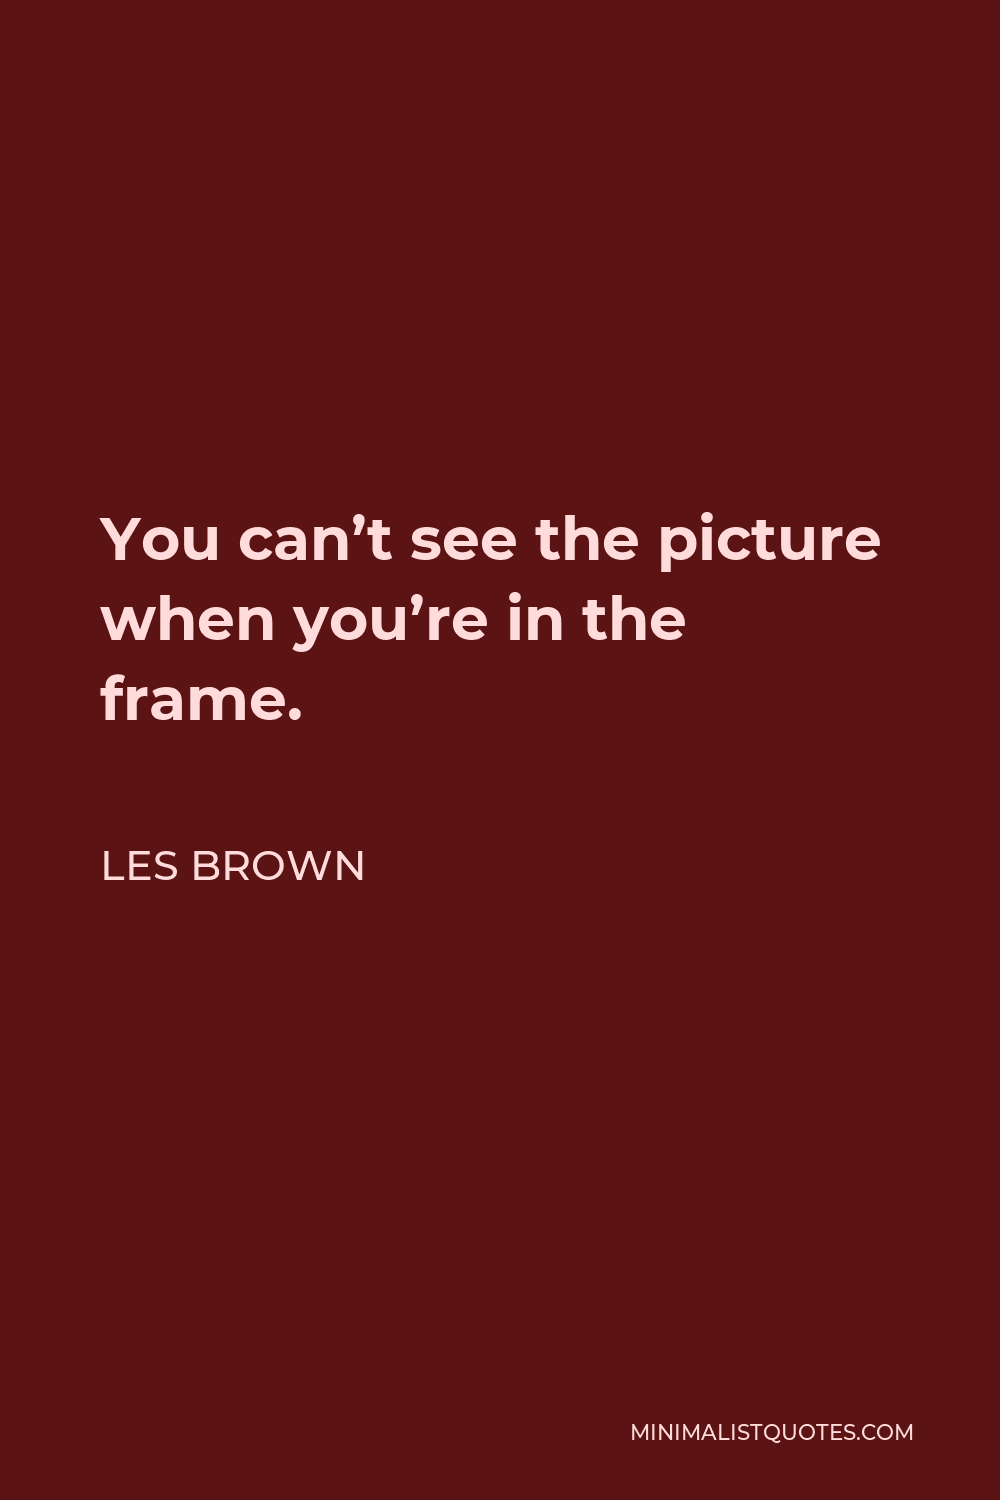 Les Brown Quote - You can’t see the picture when you’re in the frame.